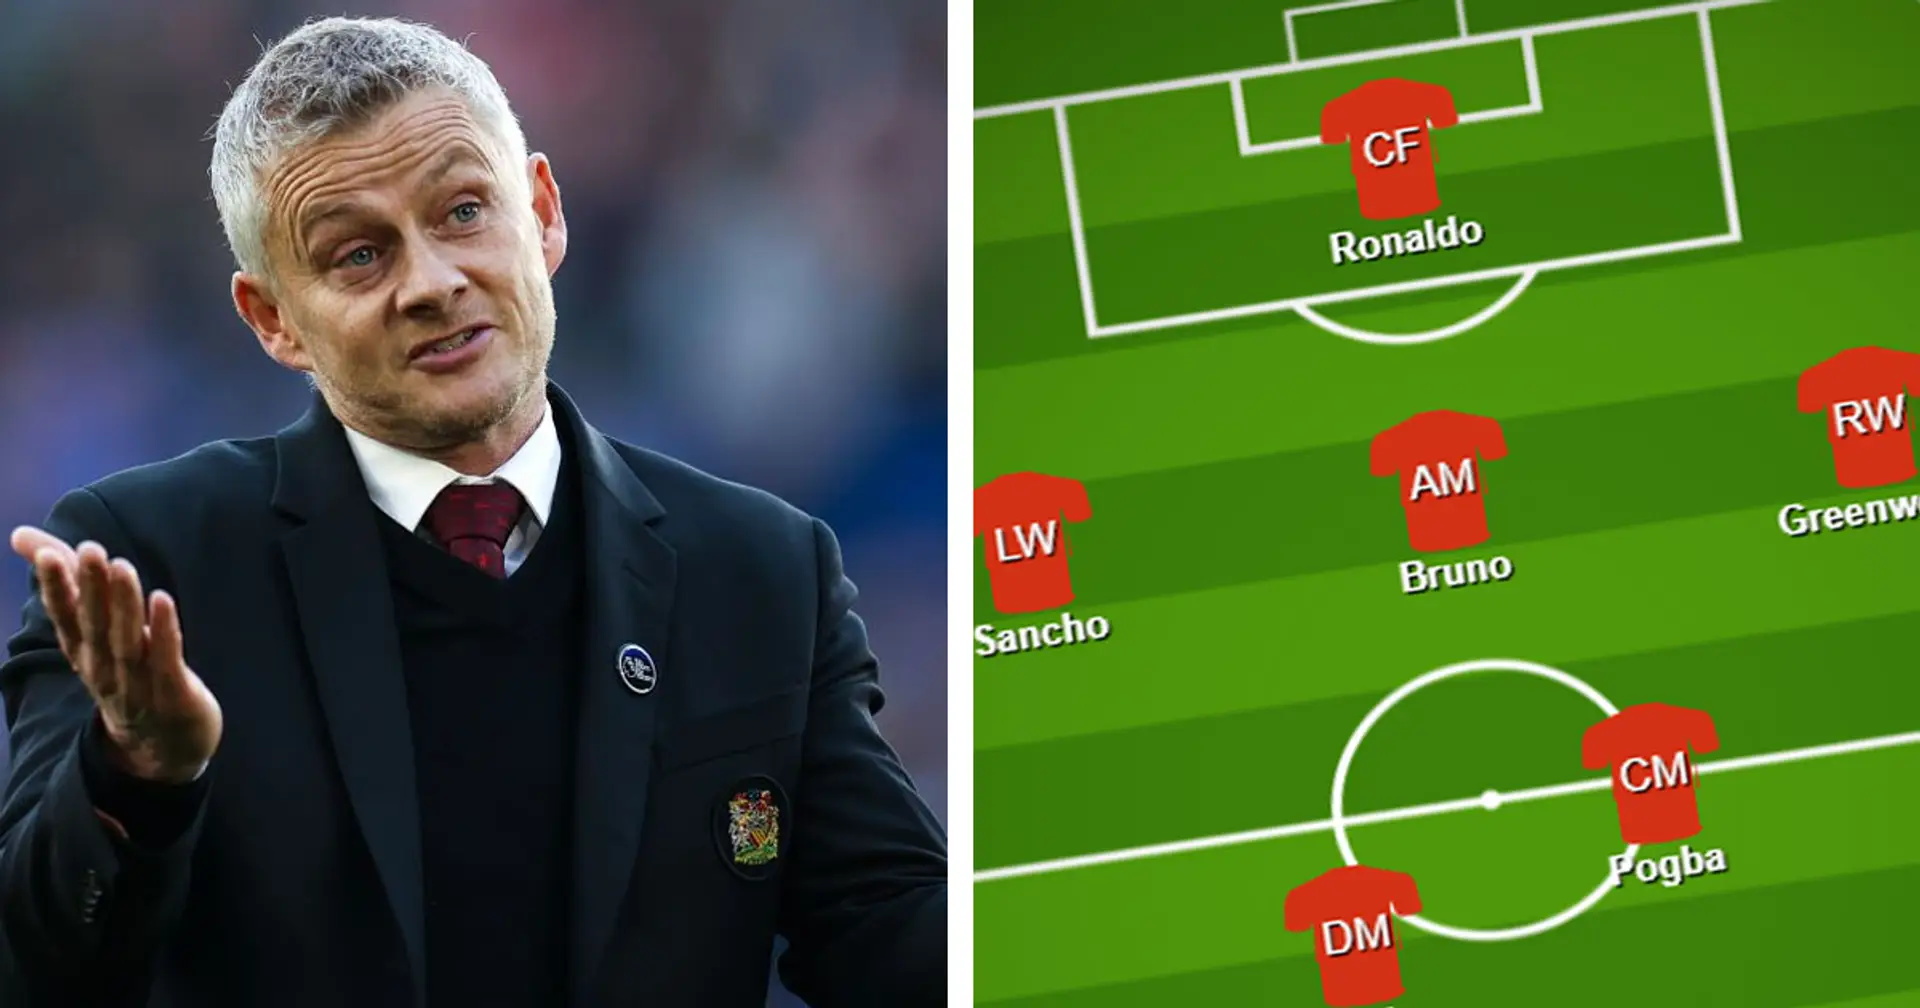 Pogba in pviot, Maguire returns: Solskjaer's formation in Leicester loss explained